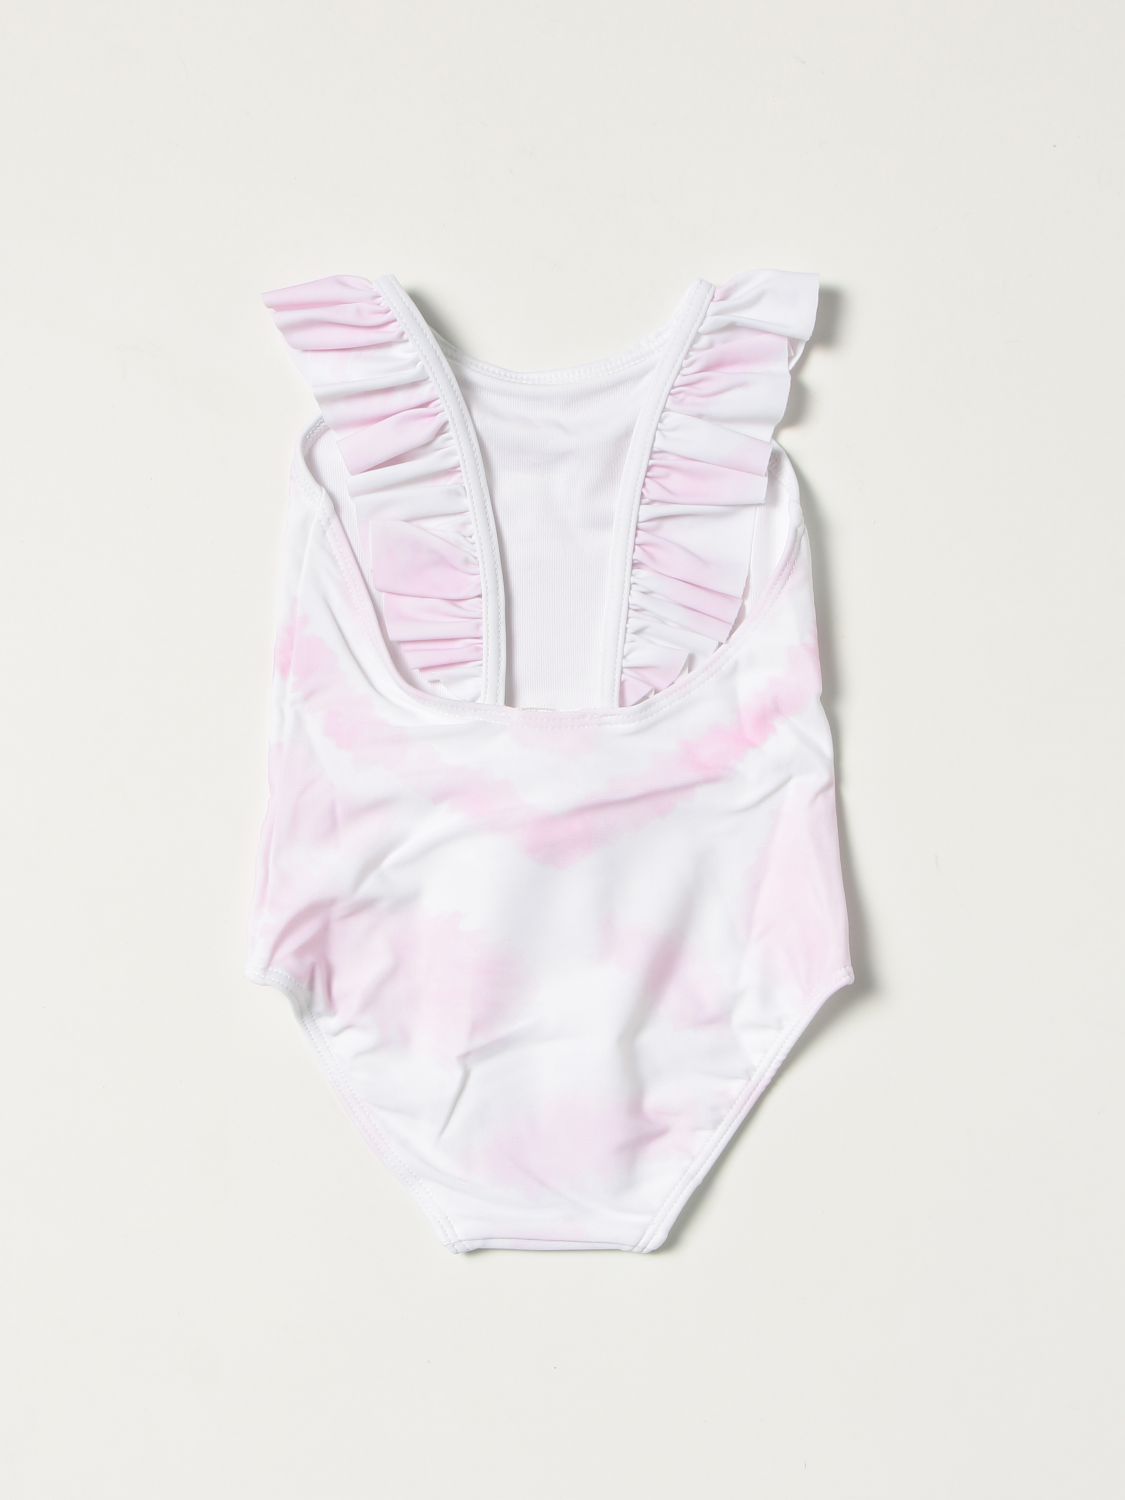 Costume Givenchy: Costume intero Givenchy con stampa tie dye rosa 2